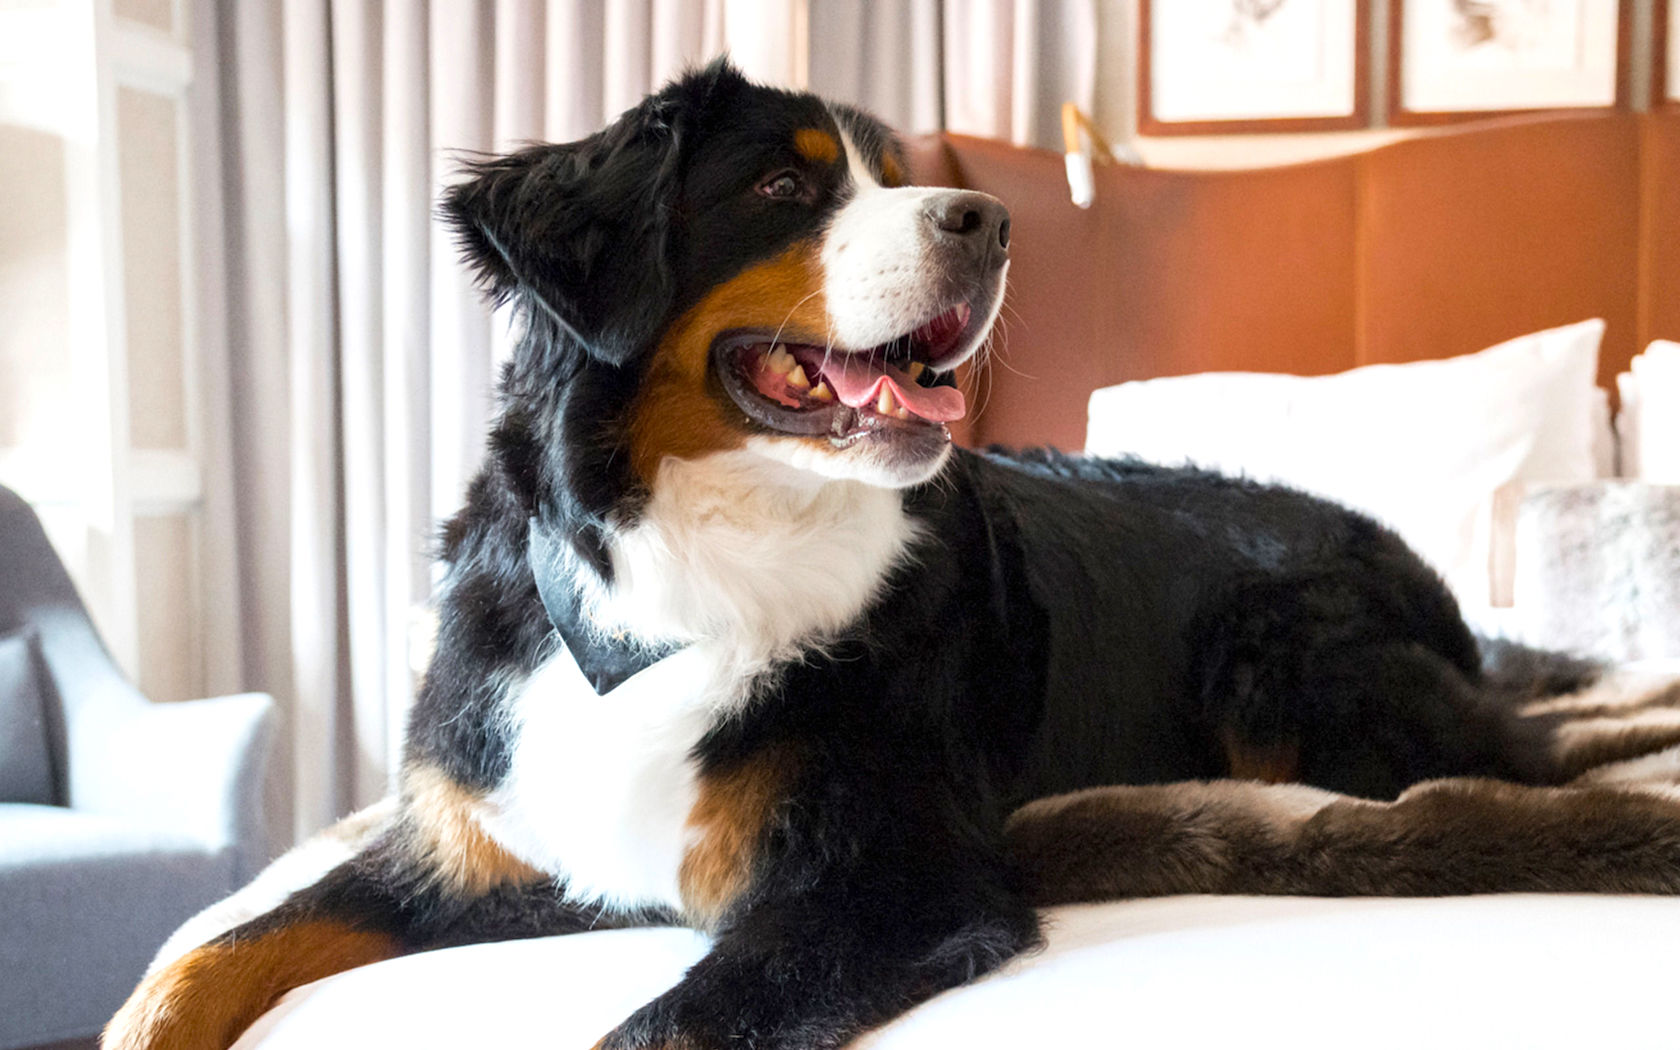 St. Regis Aspen Is Hiring A Fur Butler To Look After Its Resident Dog